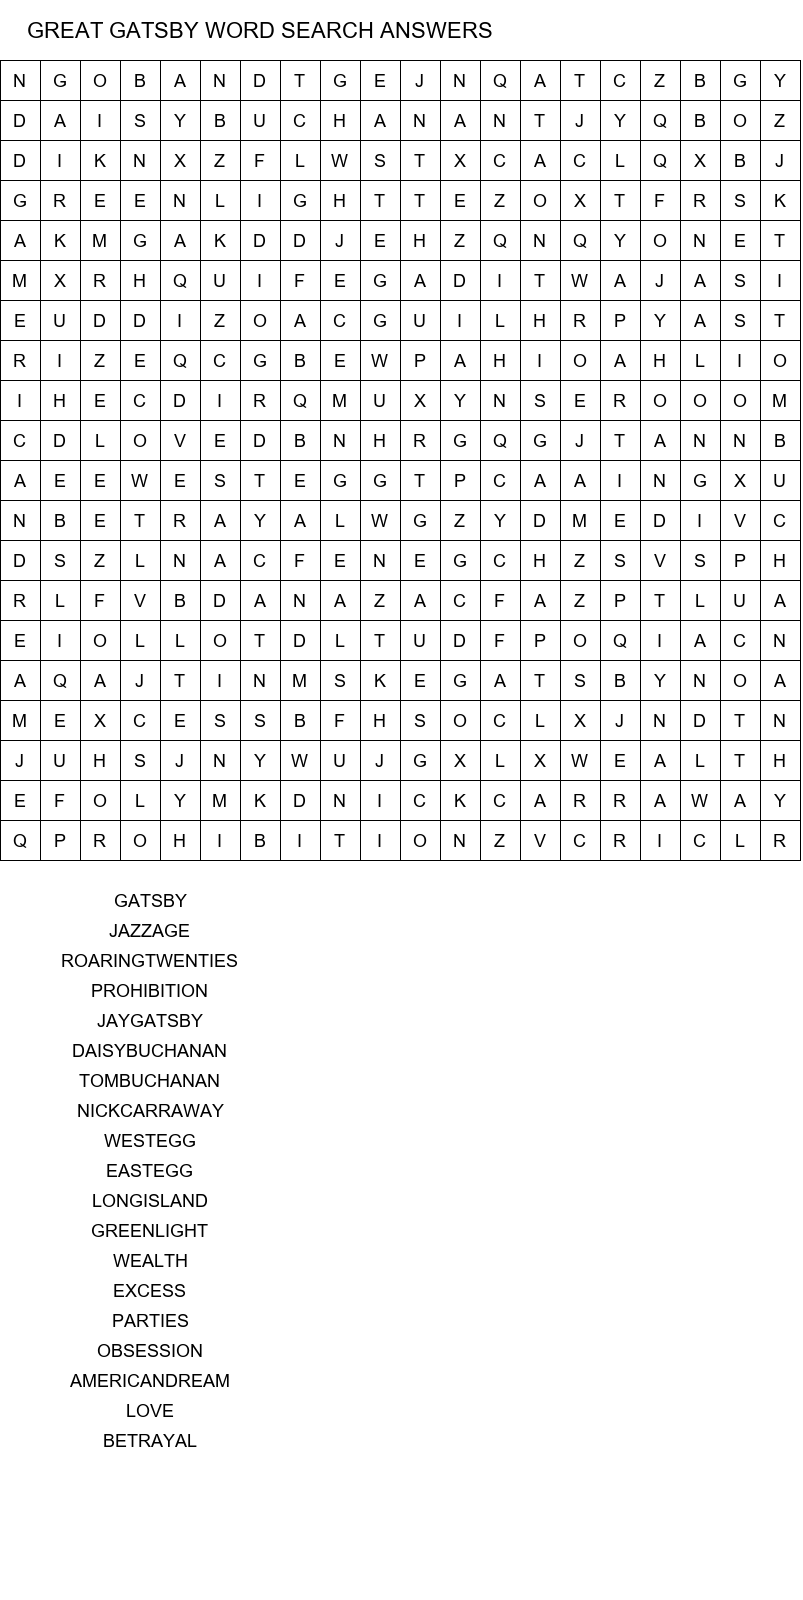 great gatsby word search answers size 20x20